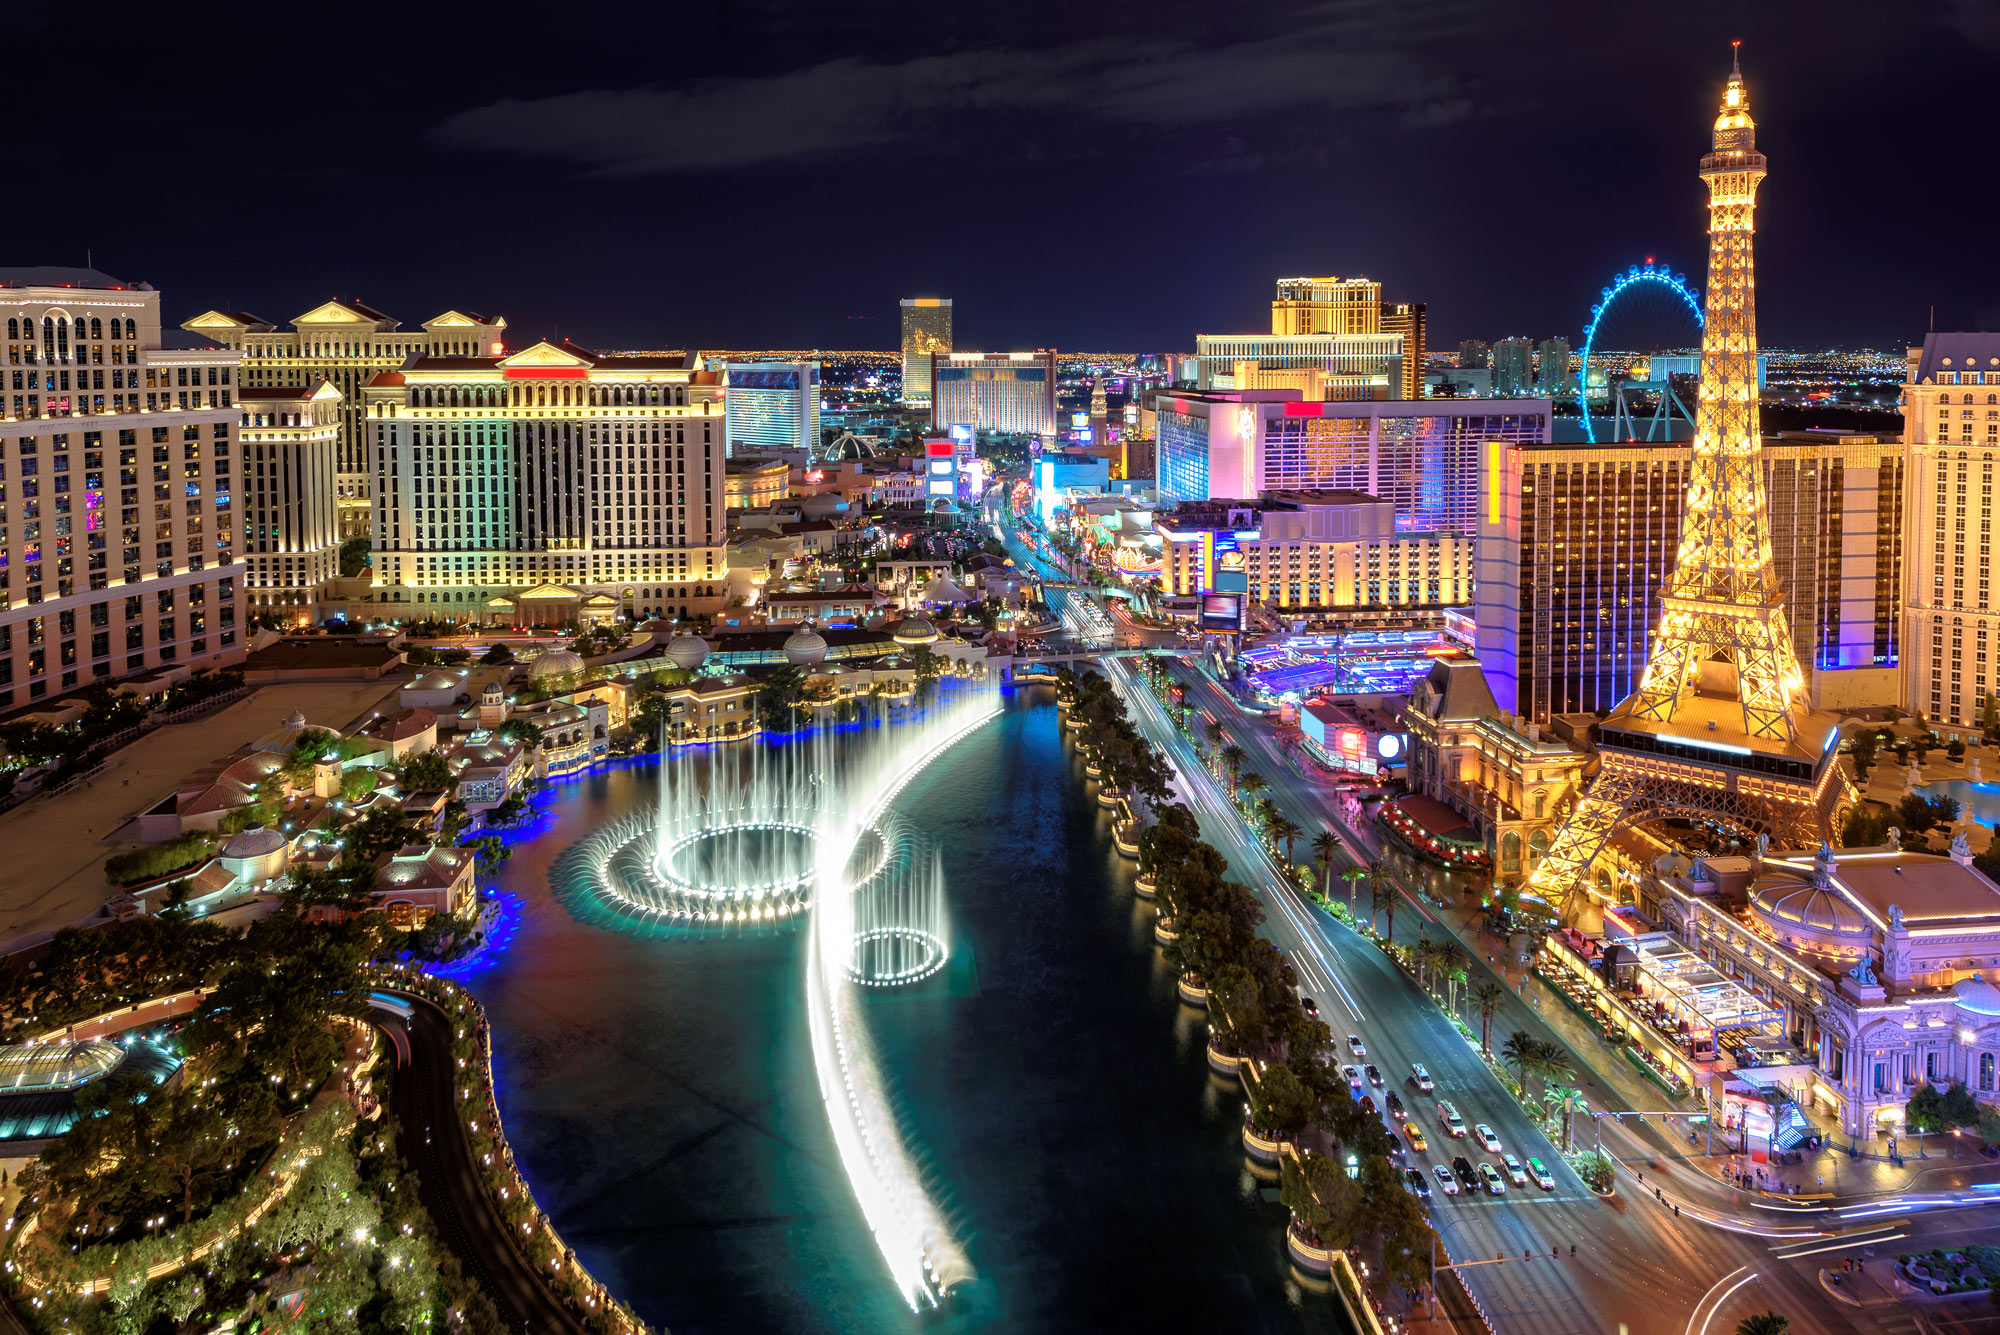 View of the Bellagio fountains in Las Vegas from an aerial perspective.